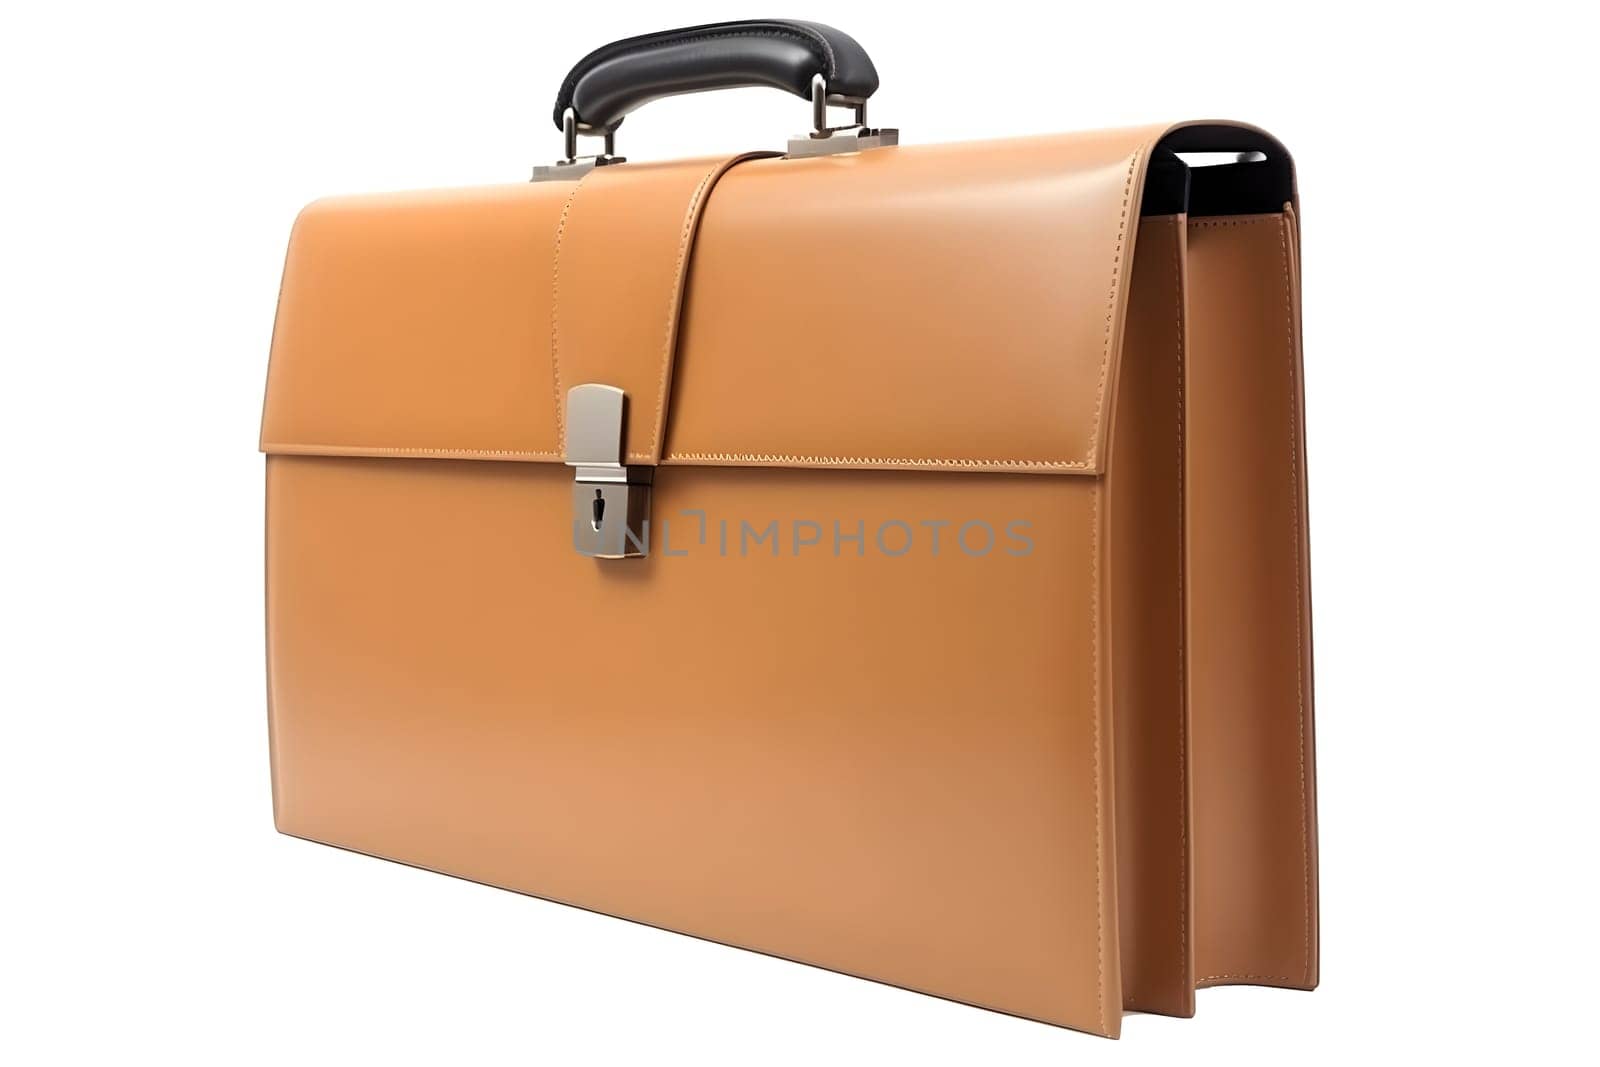 Closed generic brown leather briefcase isolated on white background, perspective three quarter view. Neural network generated in May 2023. Not based on any actual object, scene or pattern.